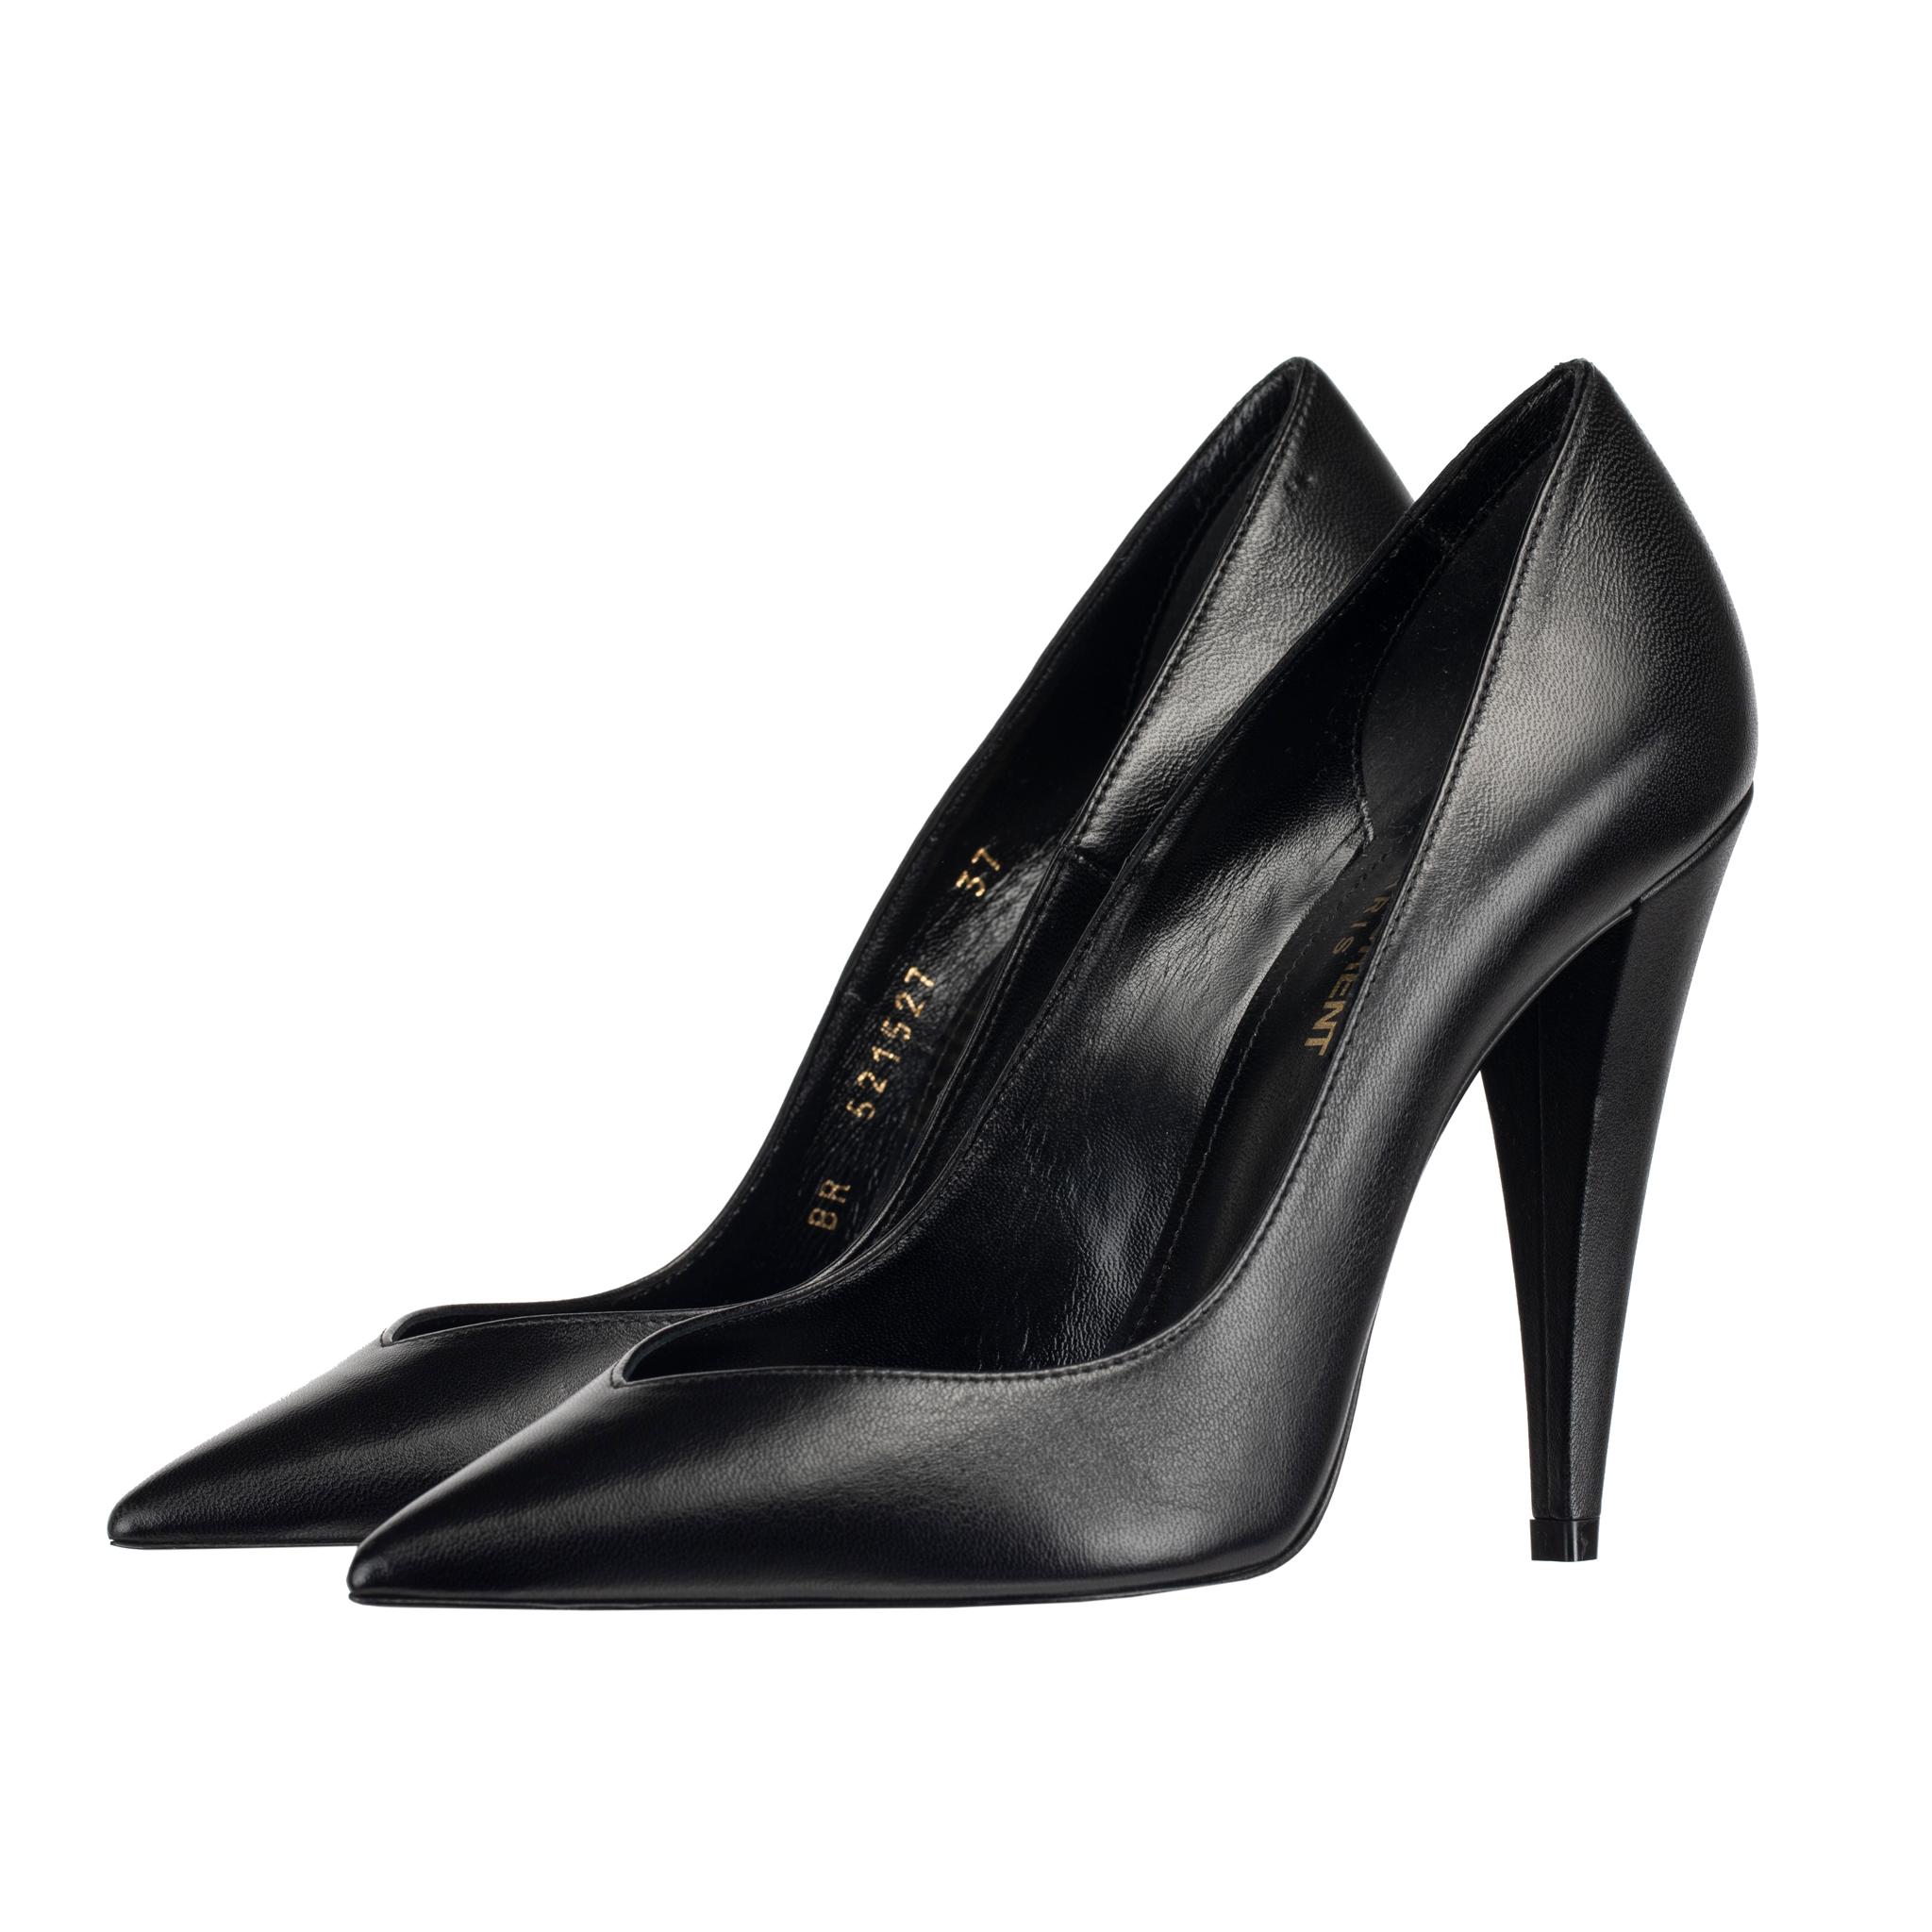 Yves Saint Laurent Decollete Era Black Leather Pumps 36 FR In New Condition For Sale In DOUBLE BAY, NSW